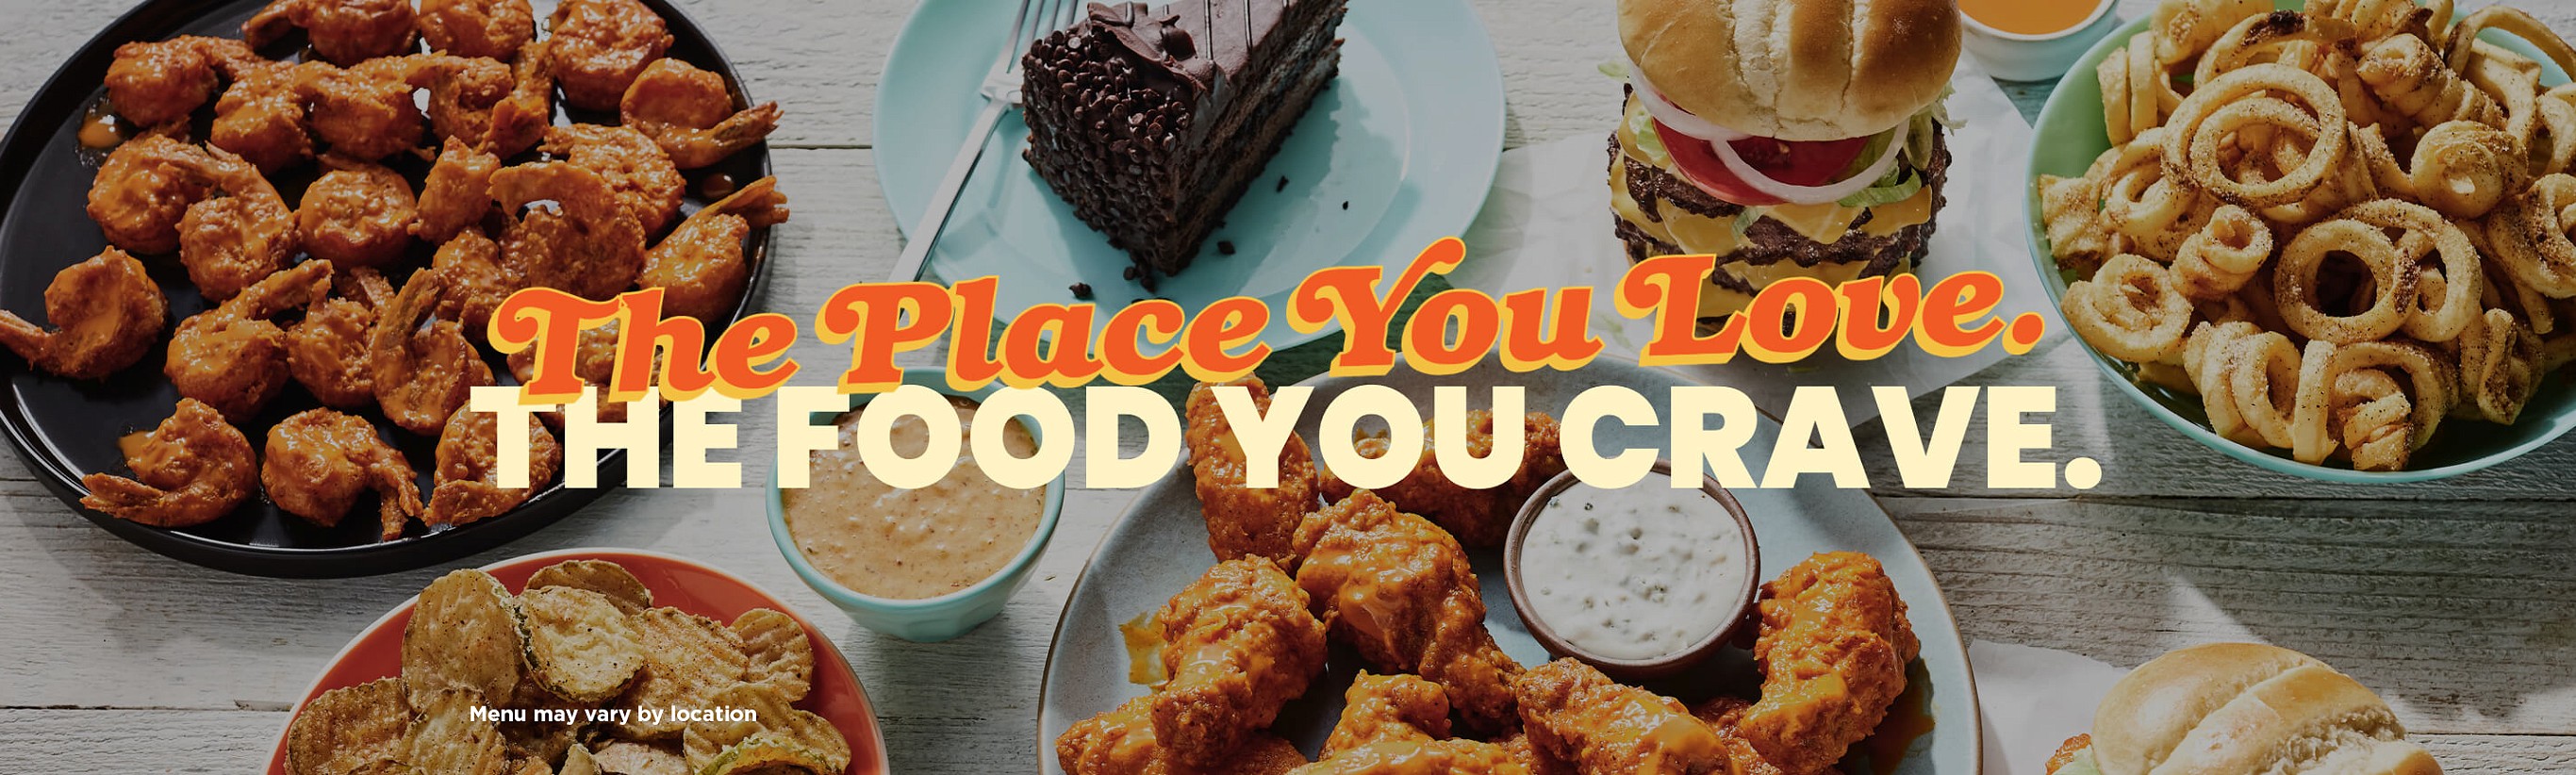 The Place You Love. The Food You Crave.